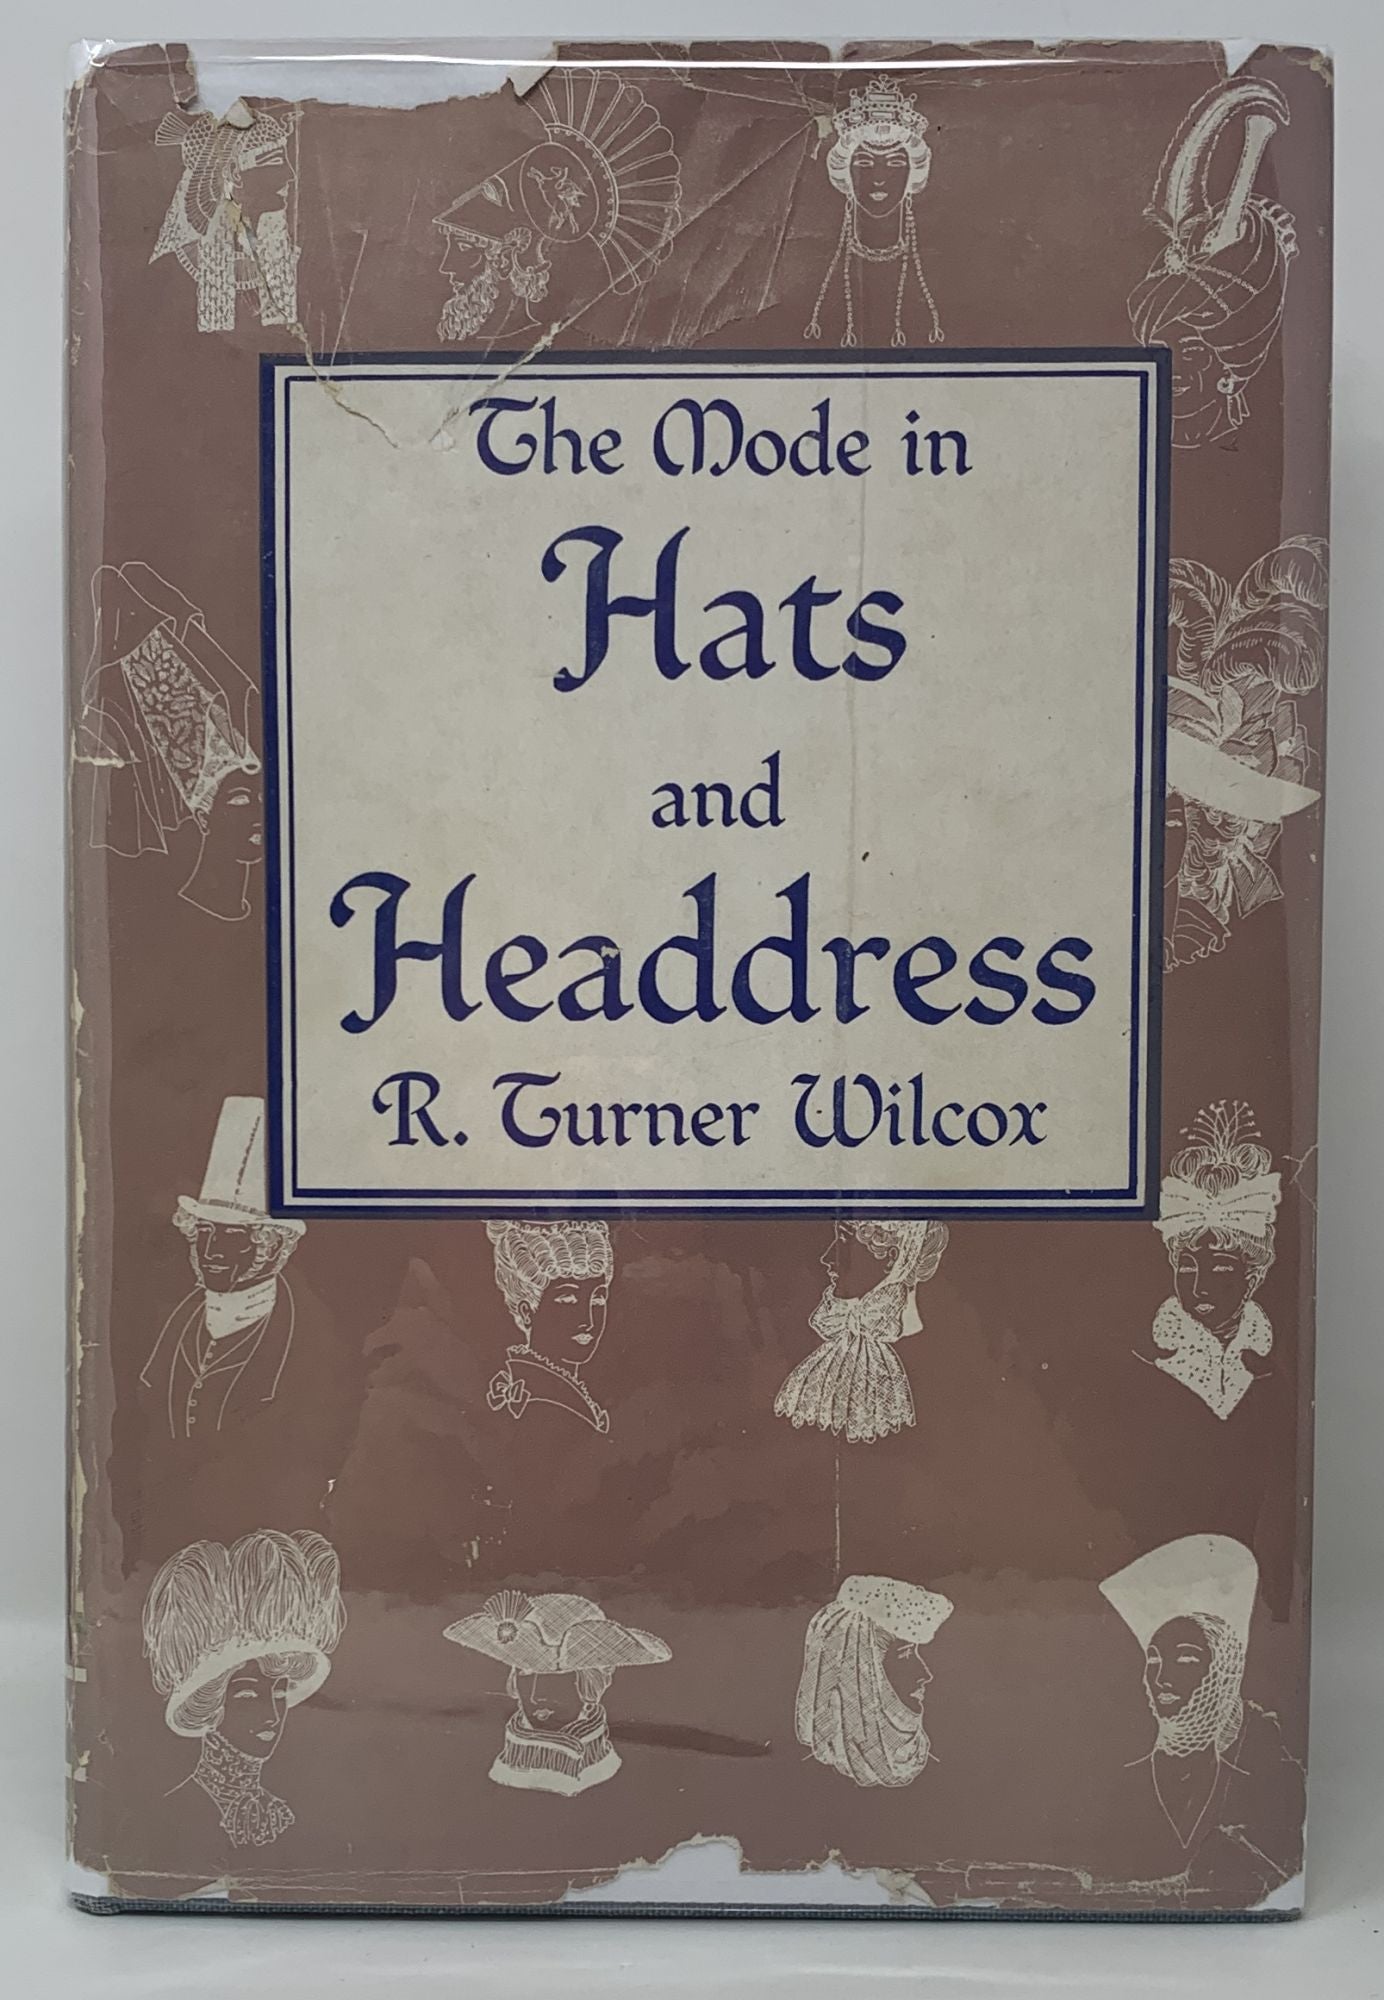 Wilcox, R. Turner - The Mode in Hats and Headdress